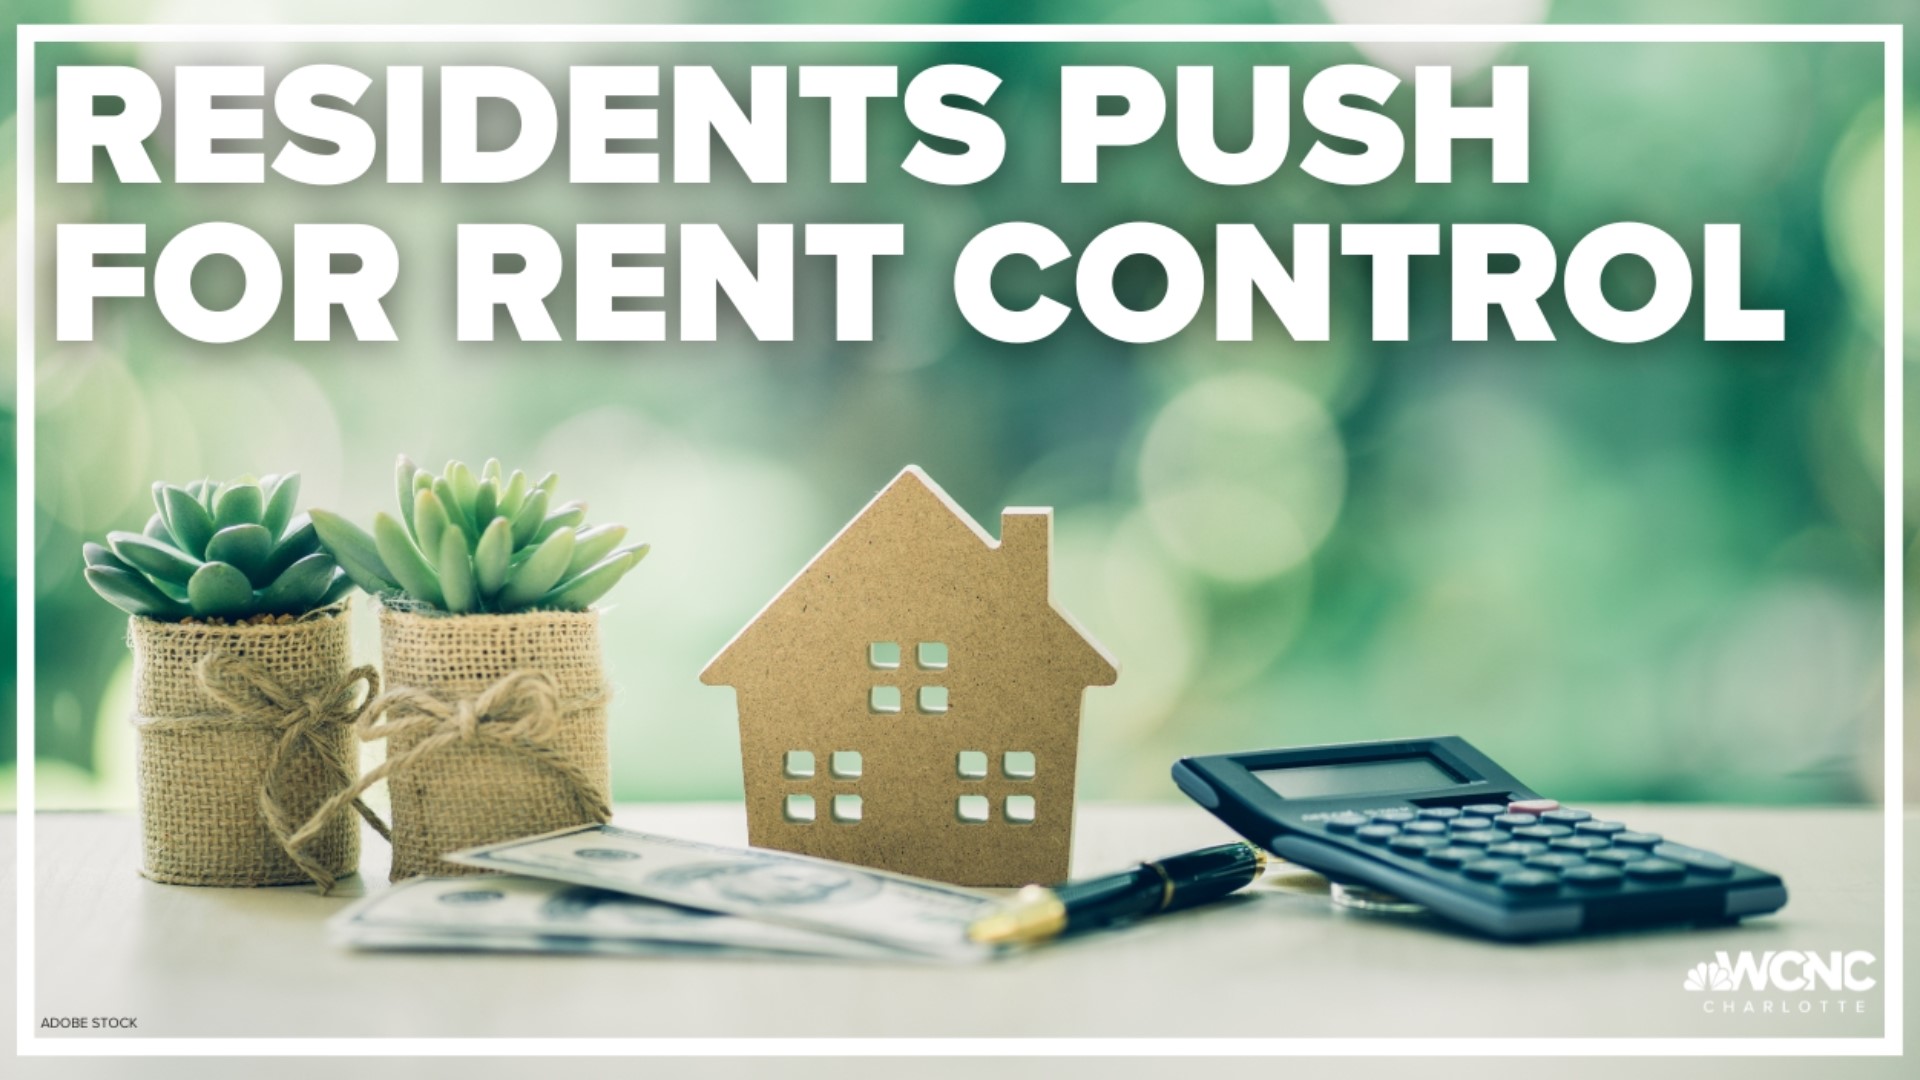 Amid rising rent prices and the number of corporate-owned rentals increasing, Charlotte-area advocates are pushing for rent control.